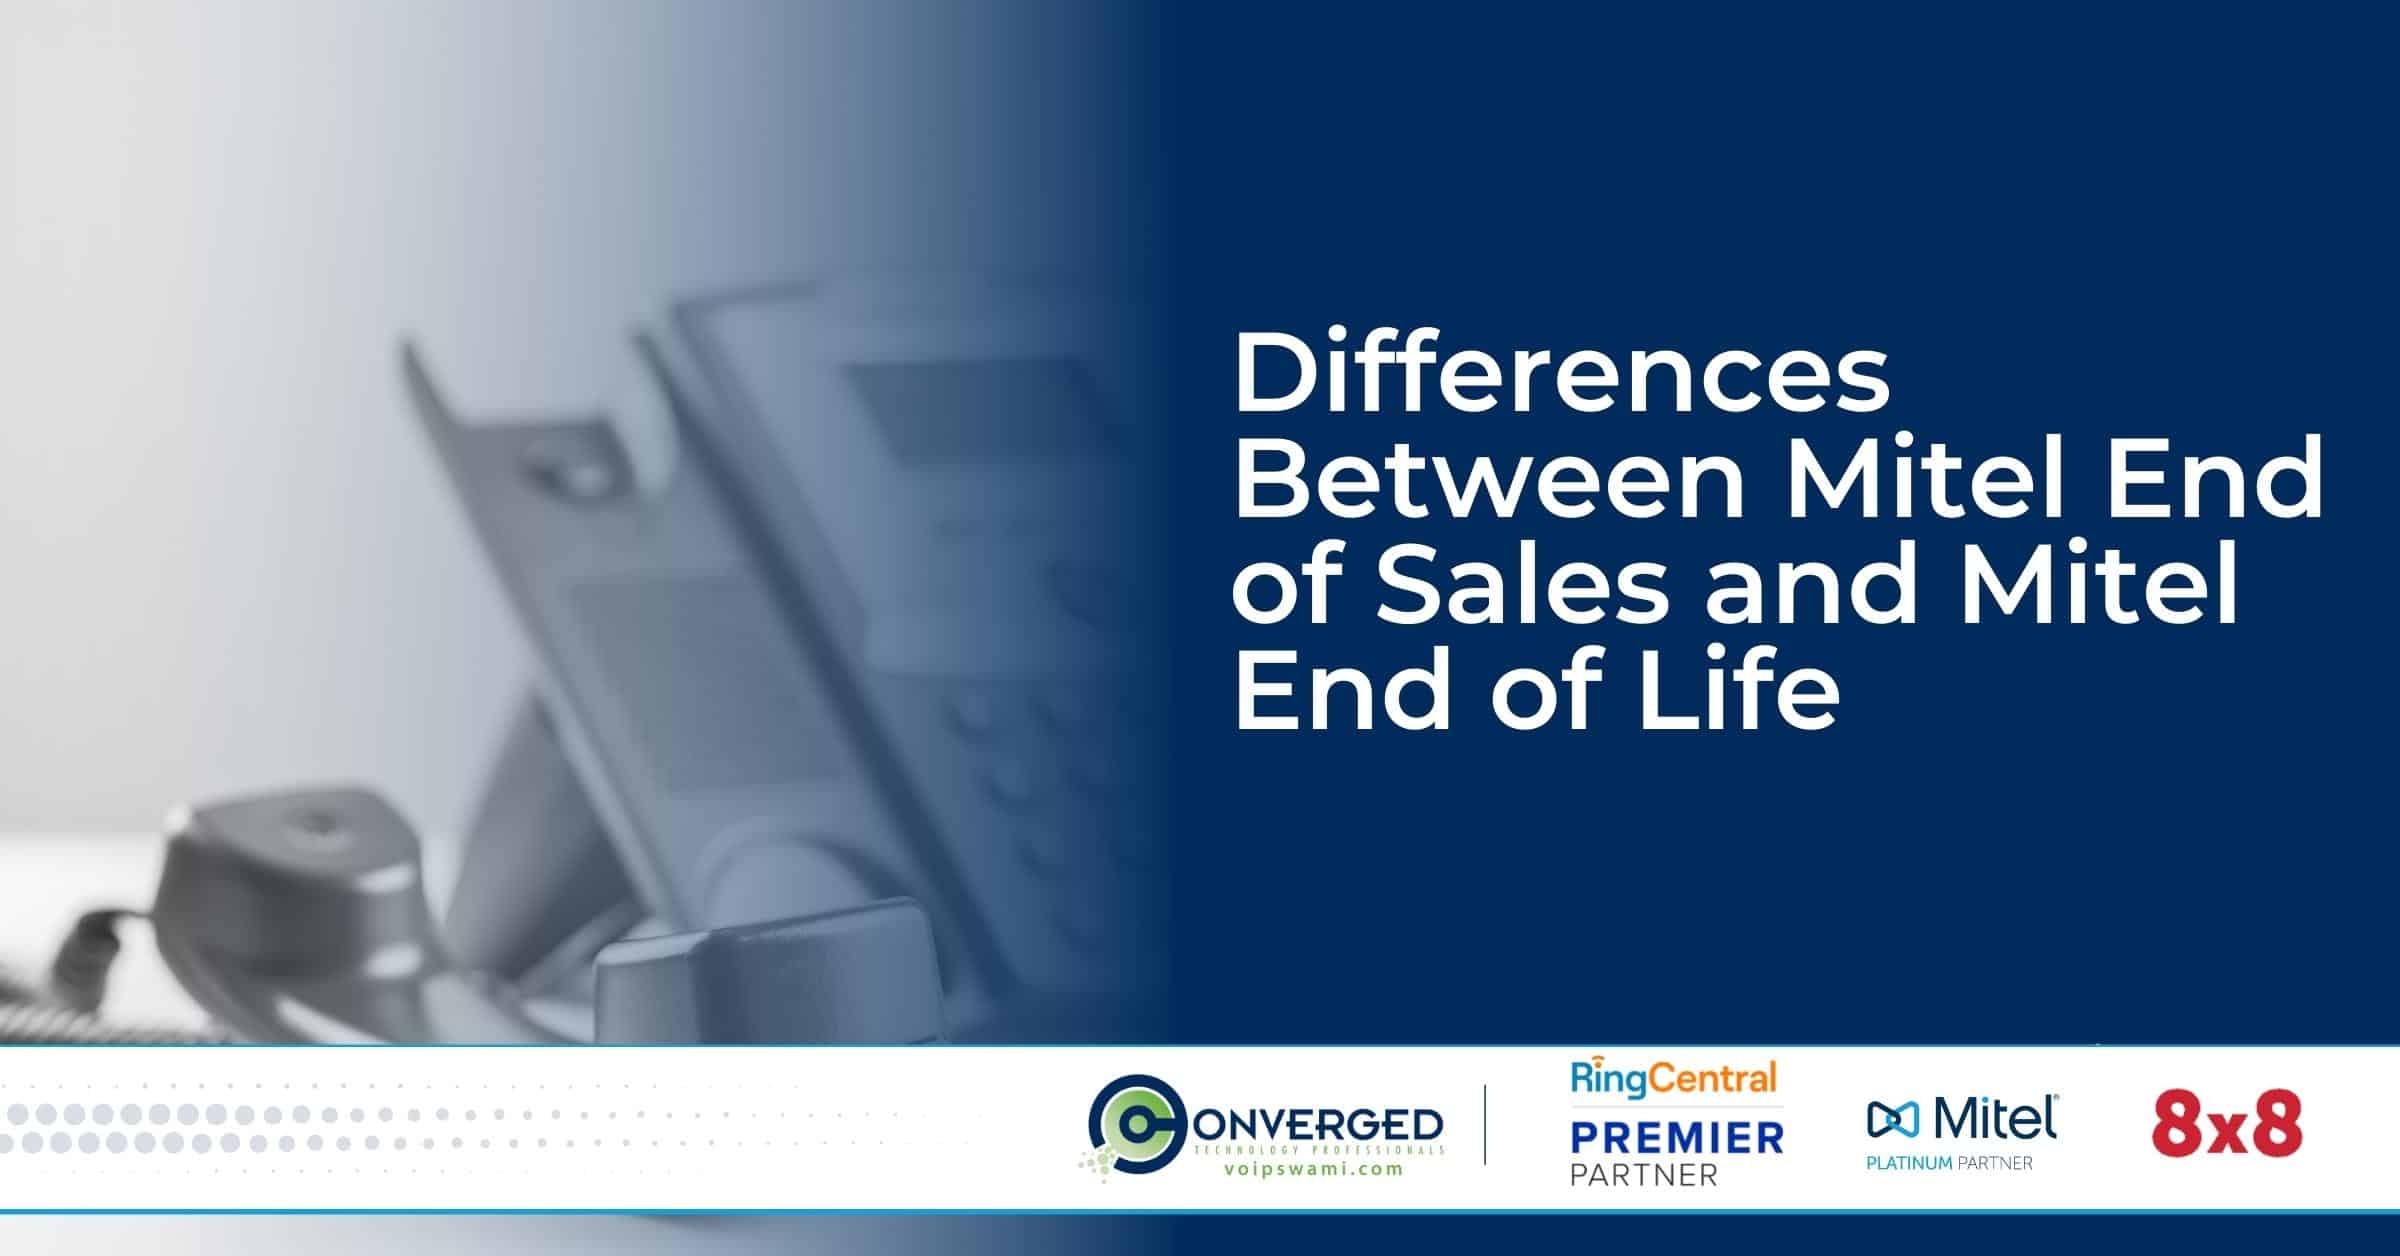 Differences Between Mitel End of Sales and Mitel End of Life